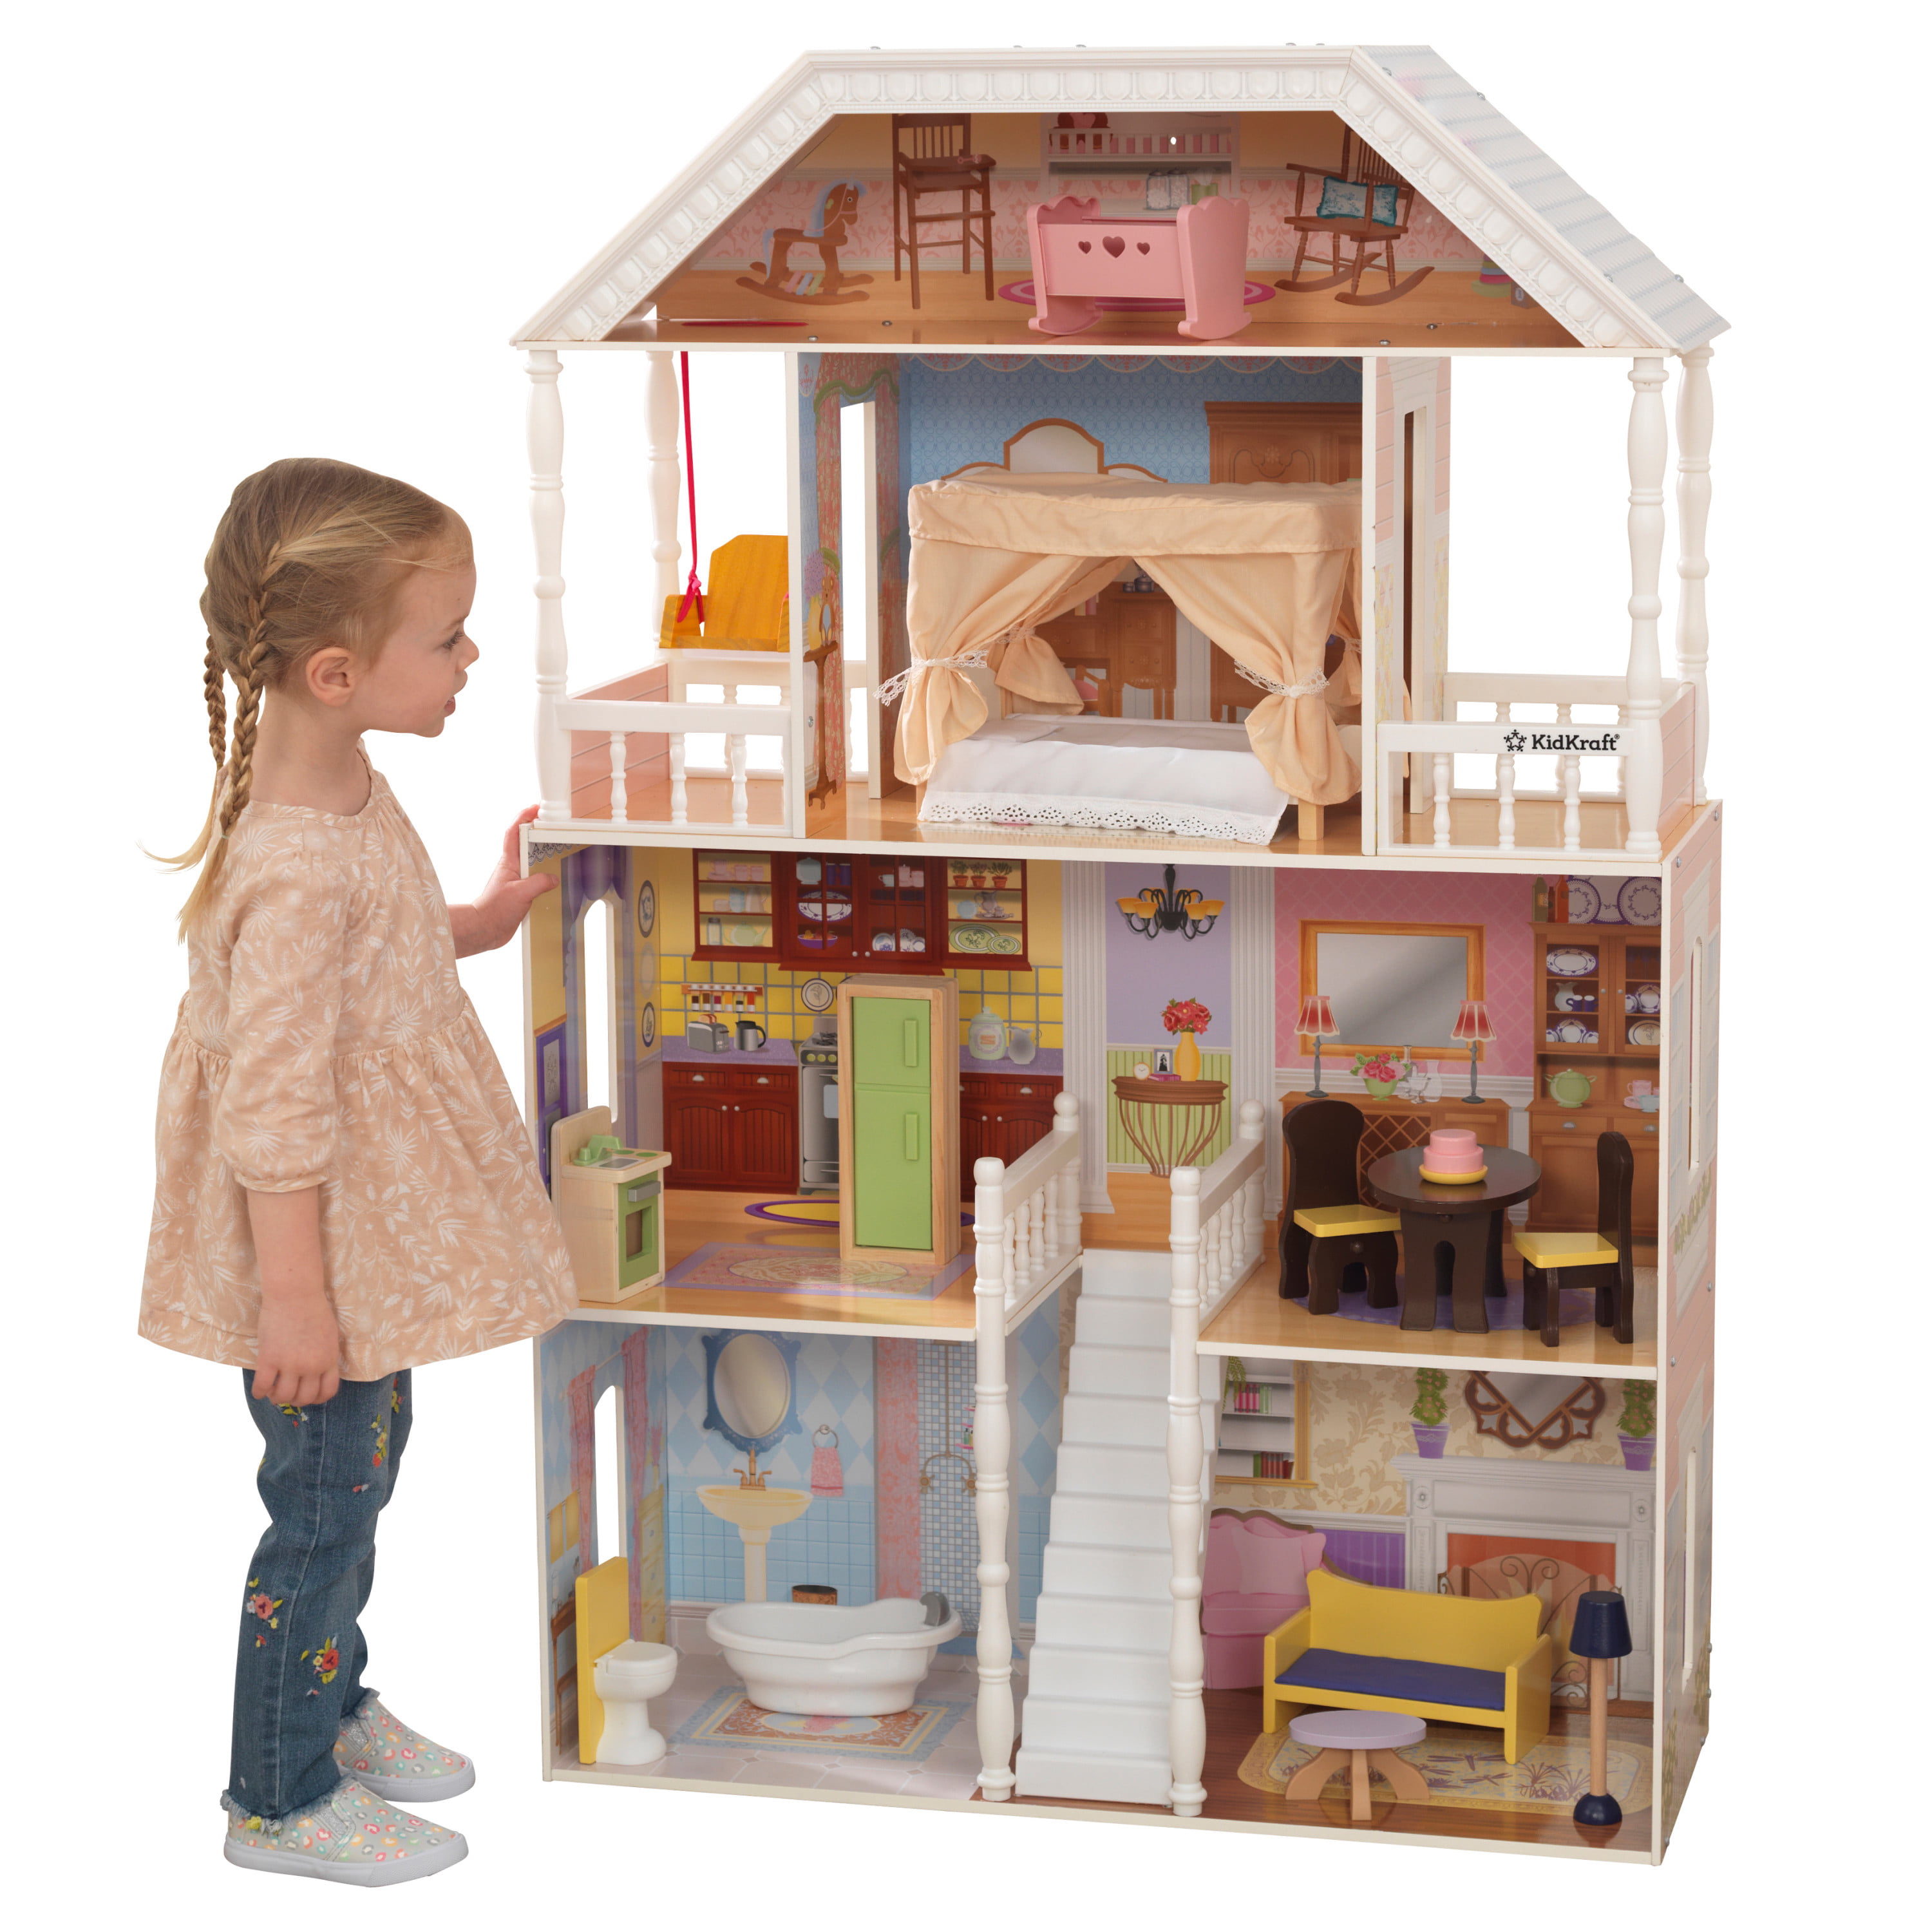 DOLL HOUSE Clear Vinyl cover up to 31" 